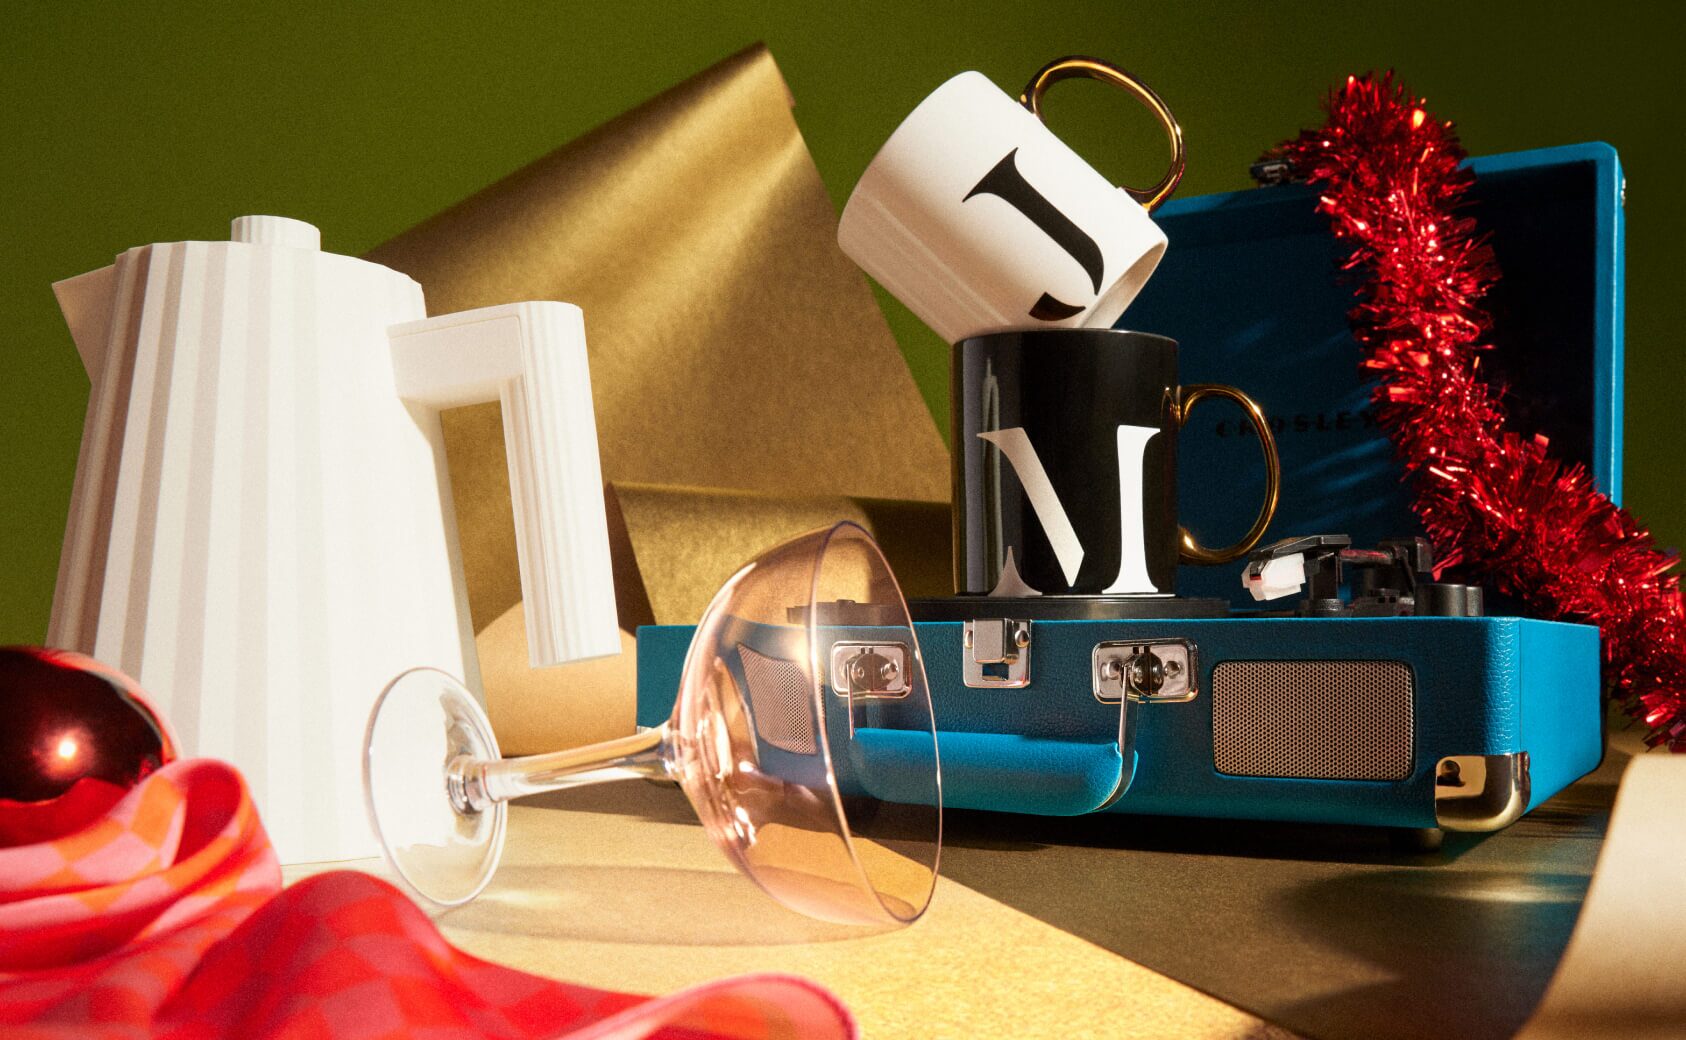 Top gifts of the season.